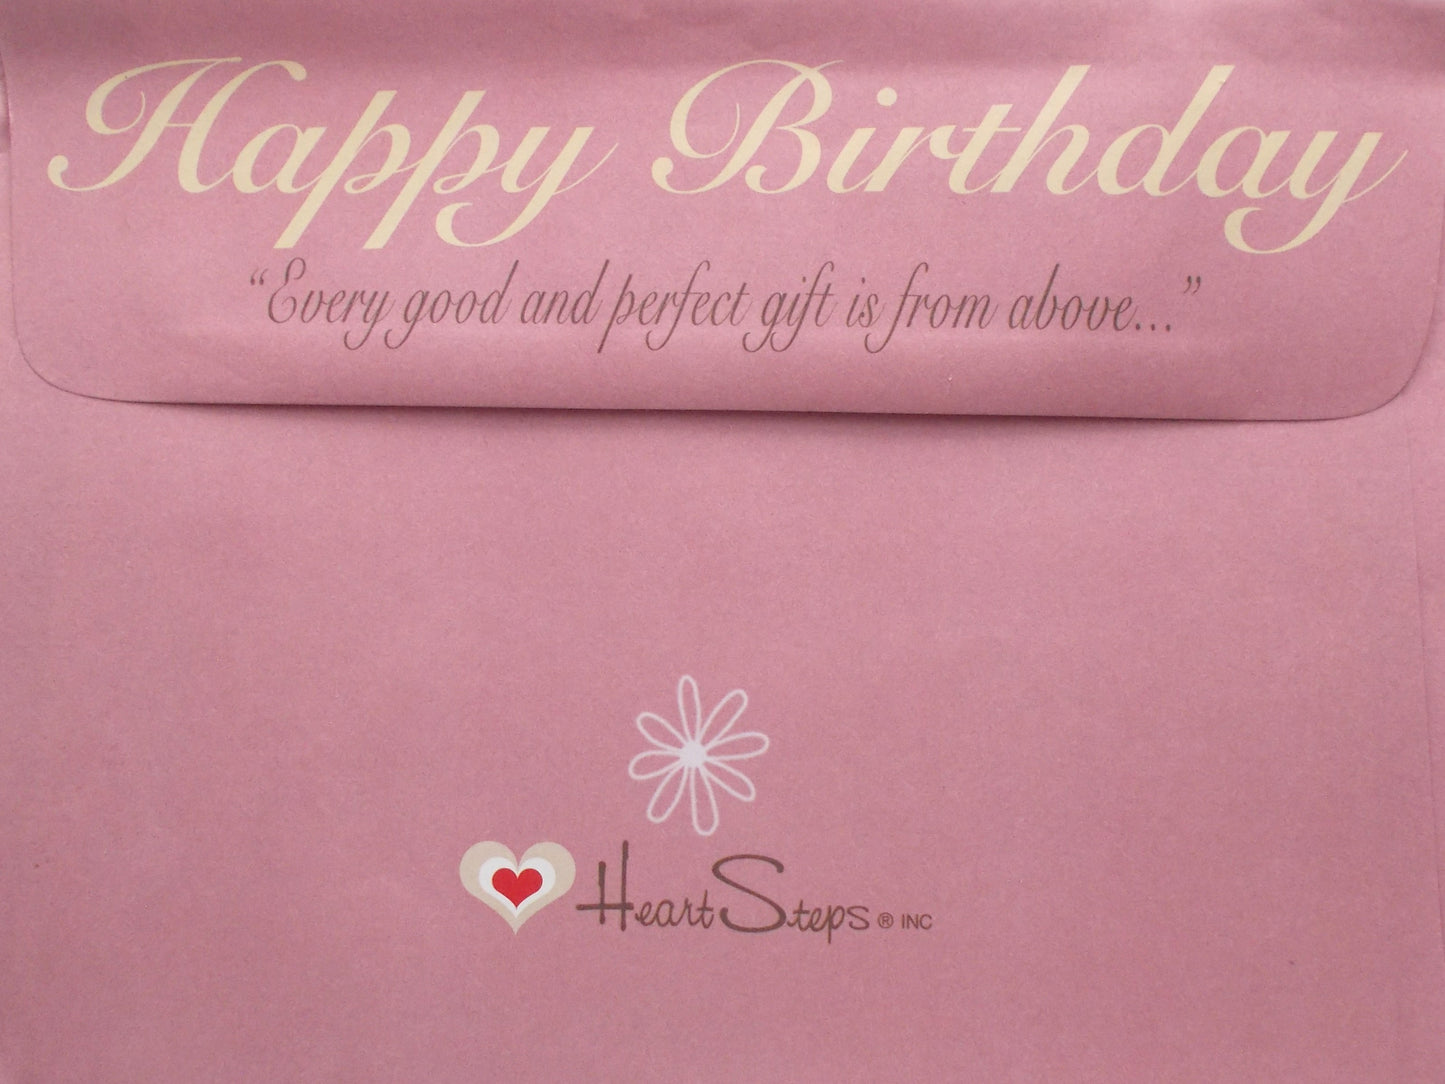 Happy Birthday Giftable Greeting - Note Pad / Bookmark